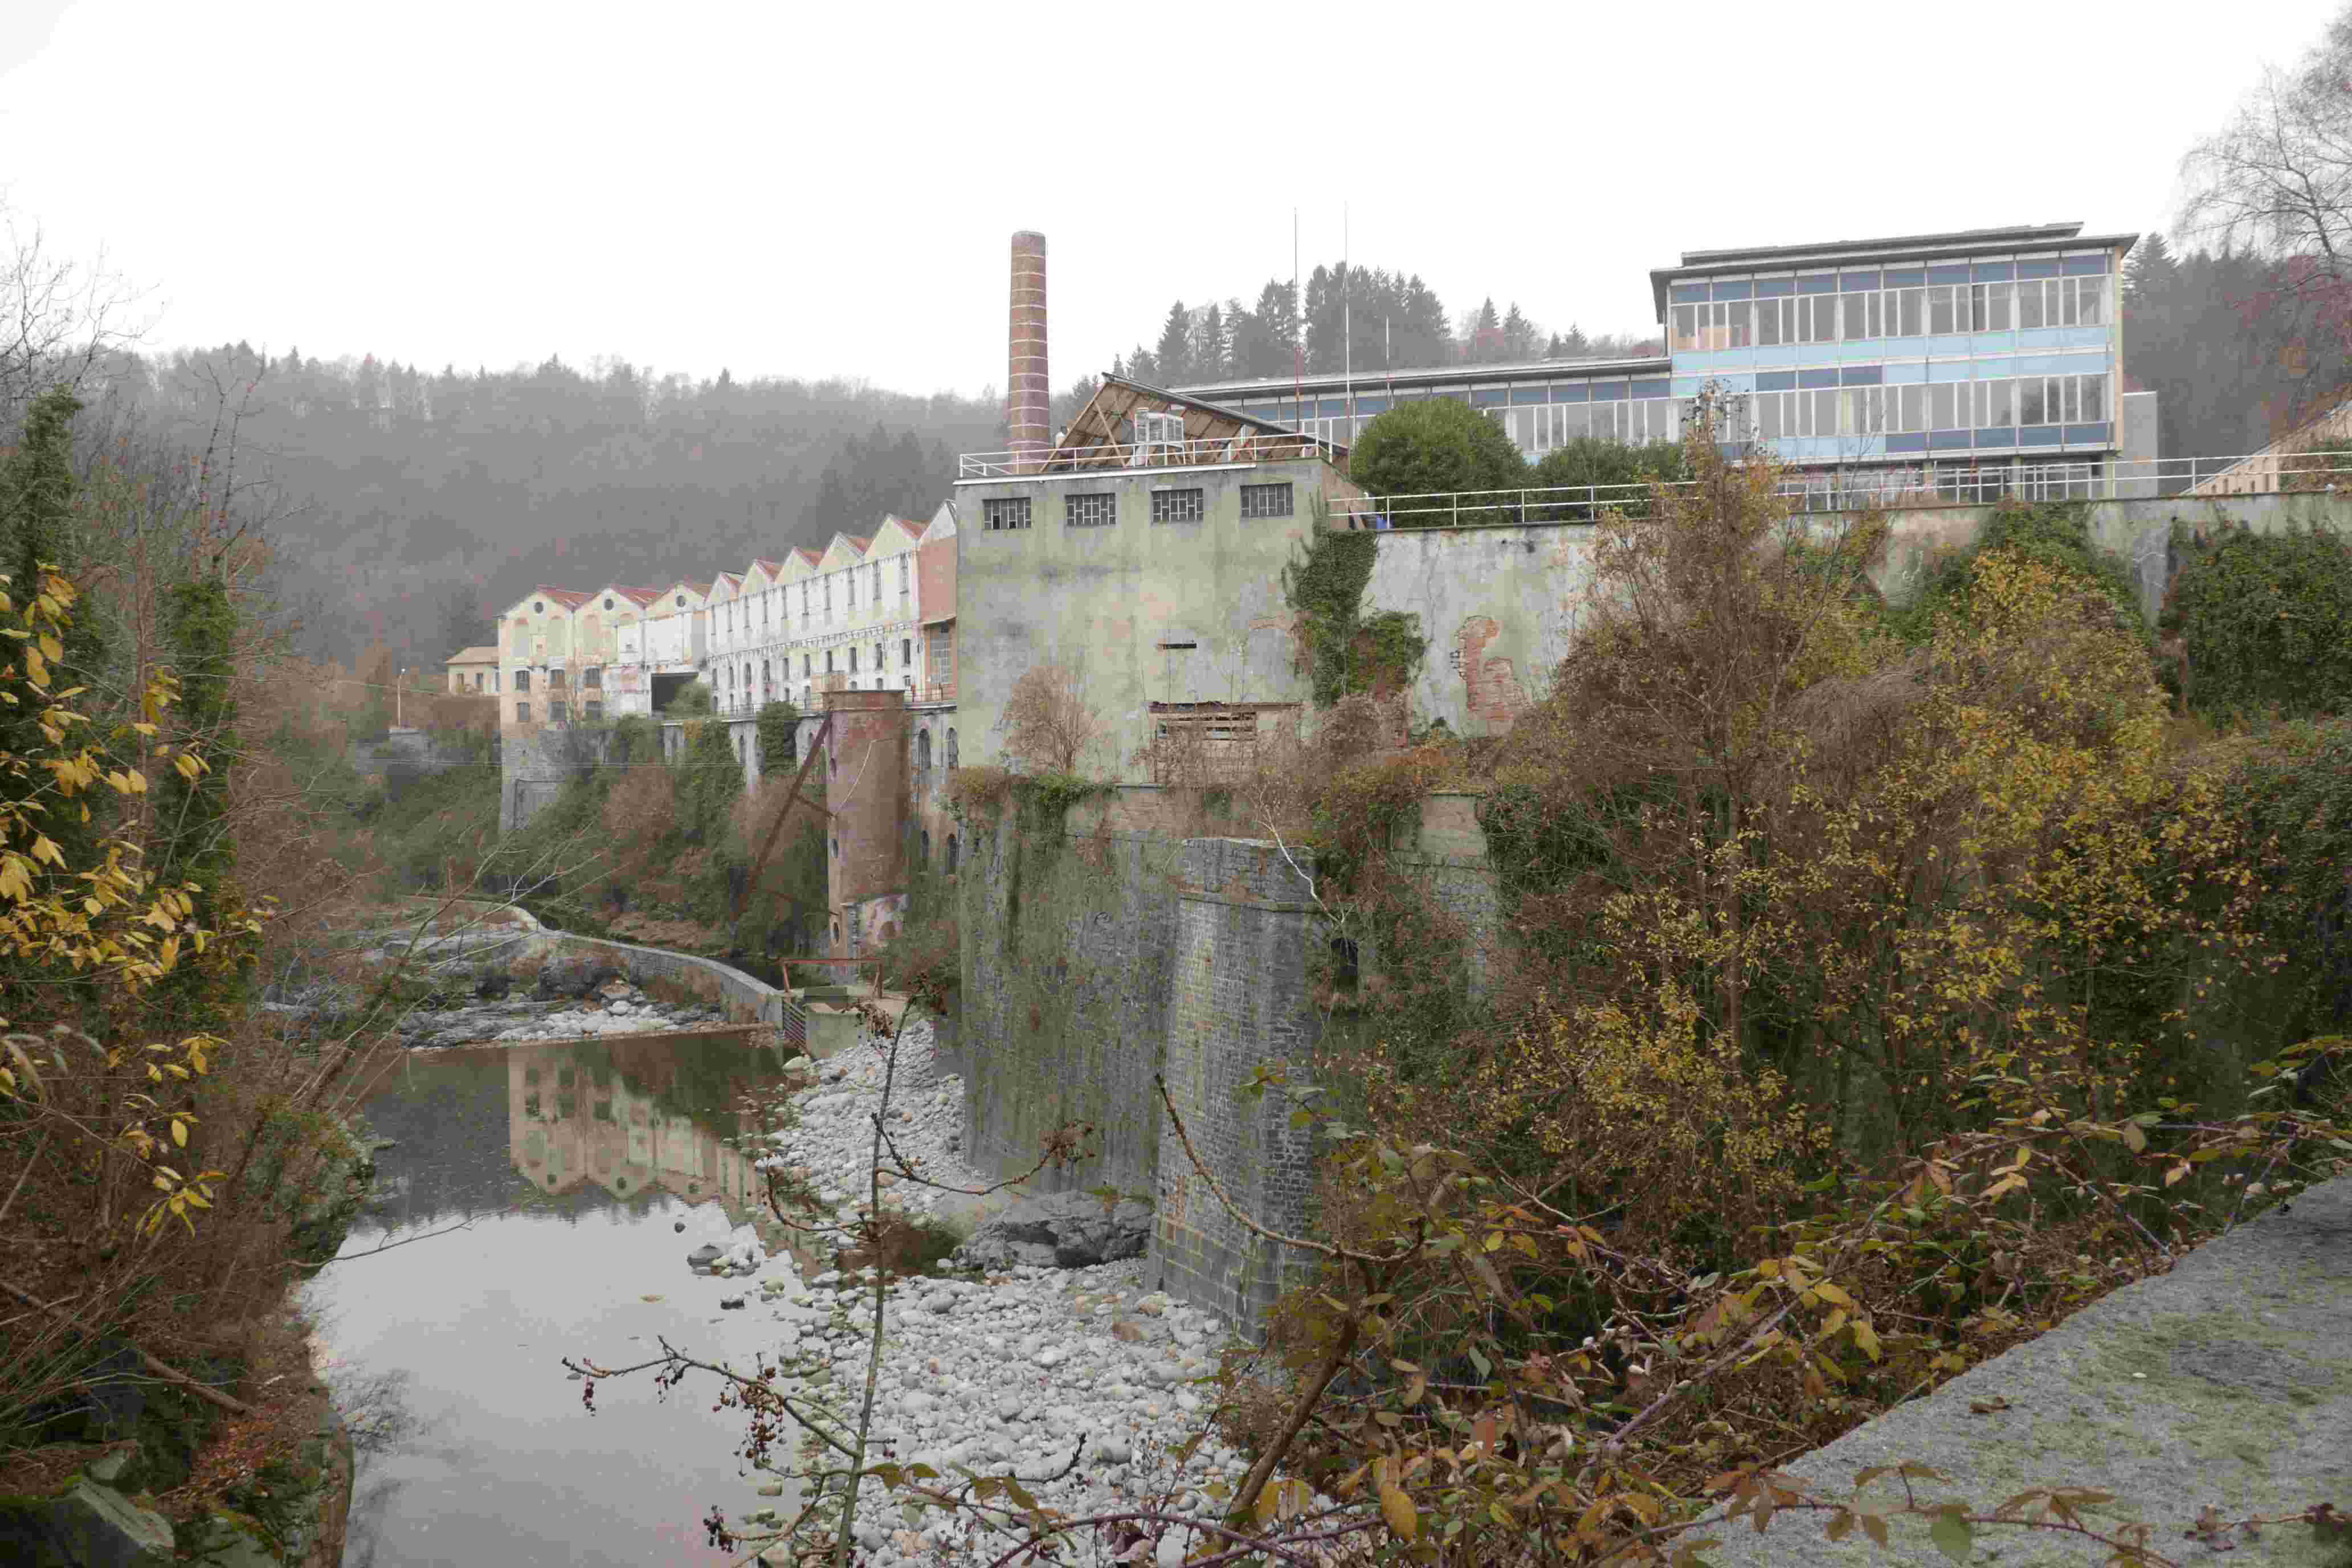 The Factory HQ of Biella The Wool Company, image taken from the company website here.